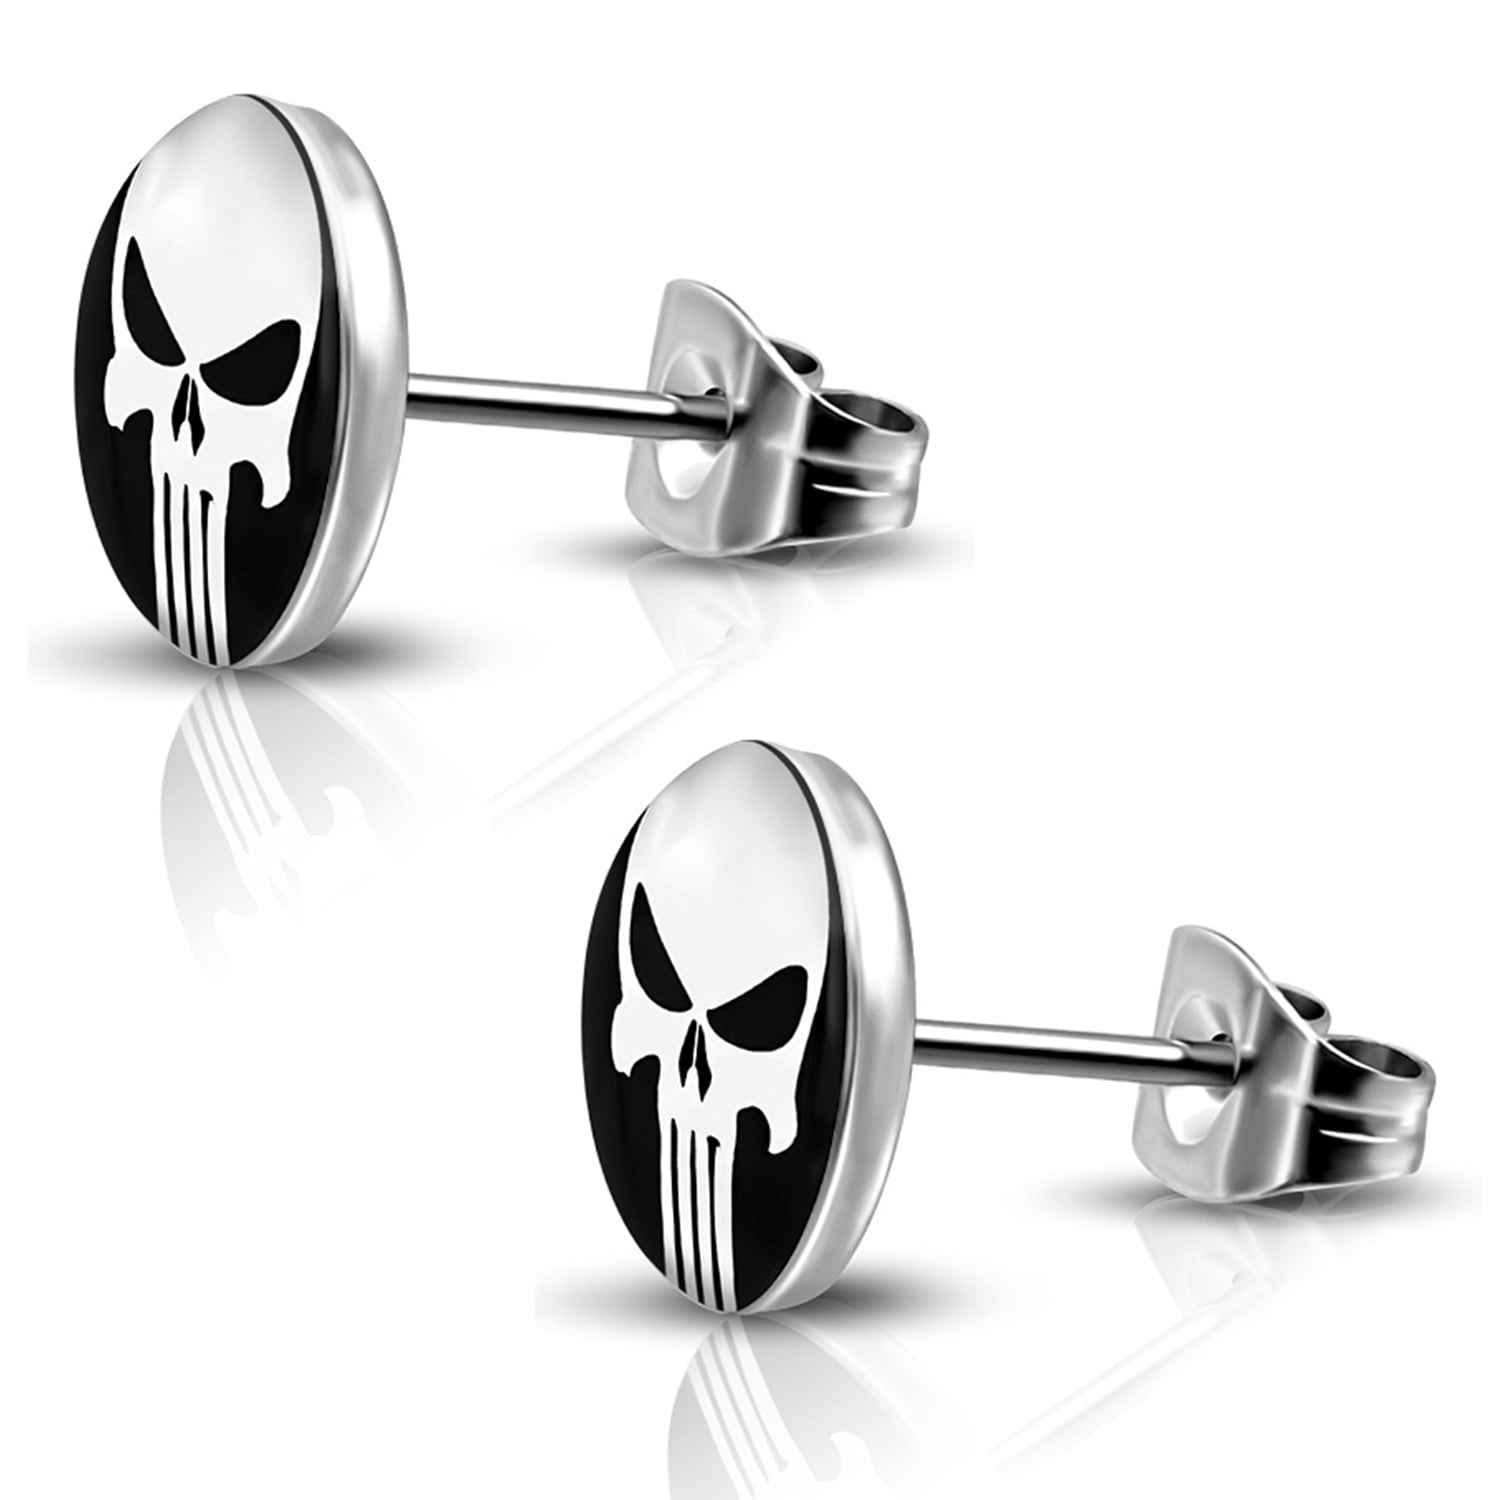 Details about   NEW Stainless Steel Jewelry Punisher Logo Black Pendent w Round Box Necklace 14T 